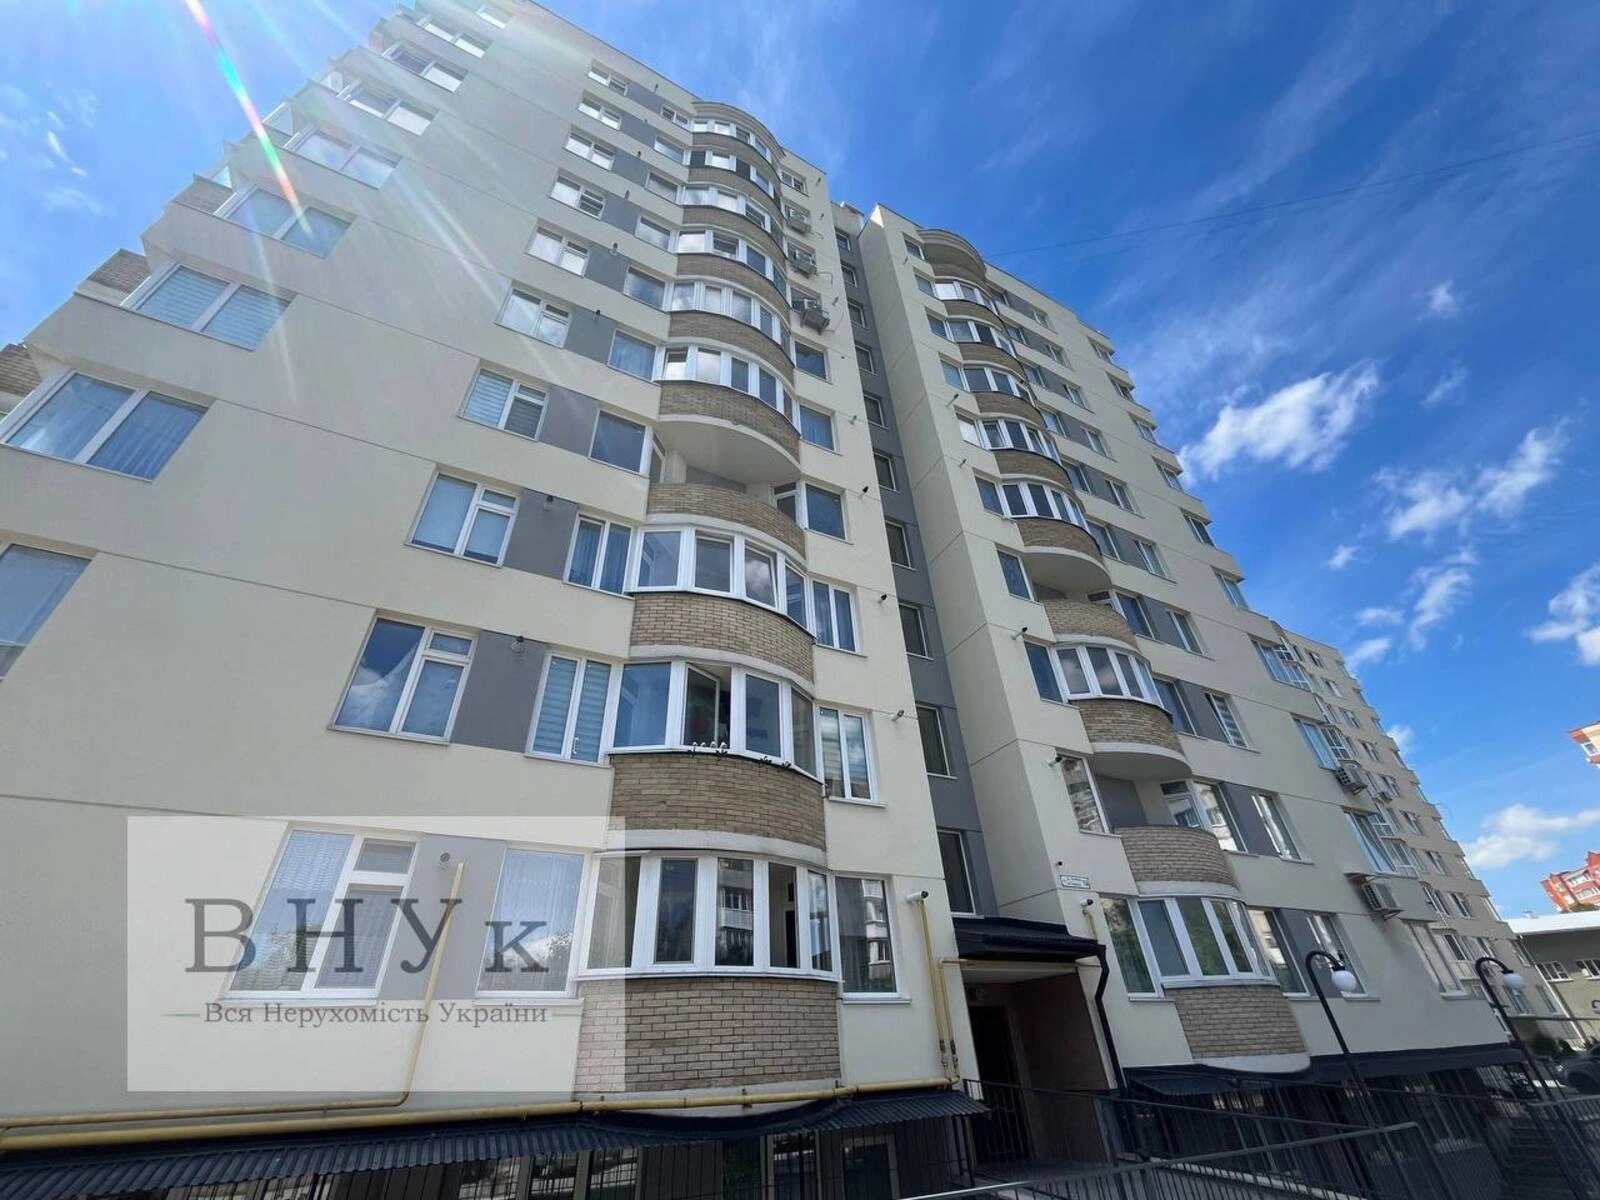 Apartments for sale. 2 rooms, 72 m², 7th floor/9 floors. Troleybusna vul., Ternopil. 